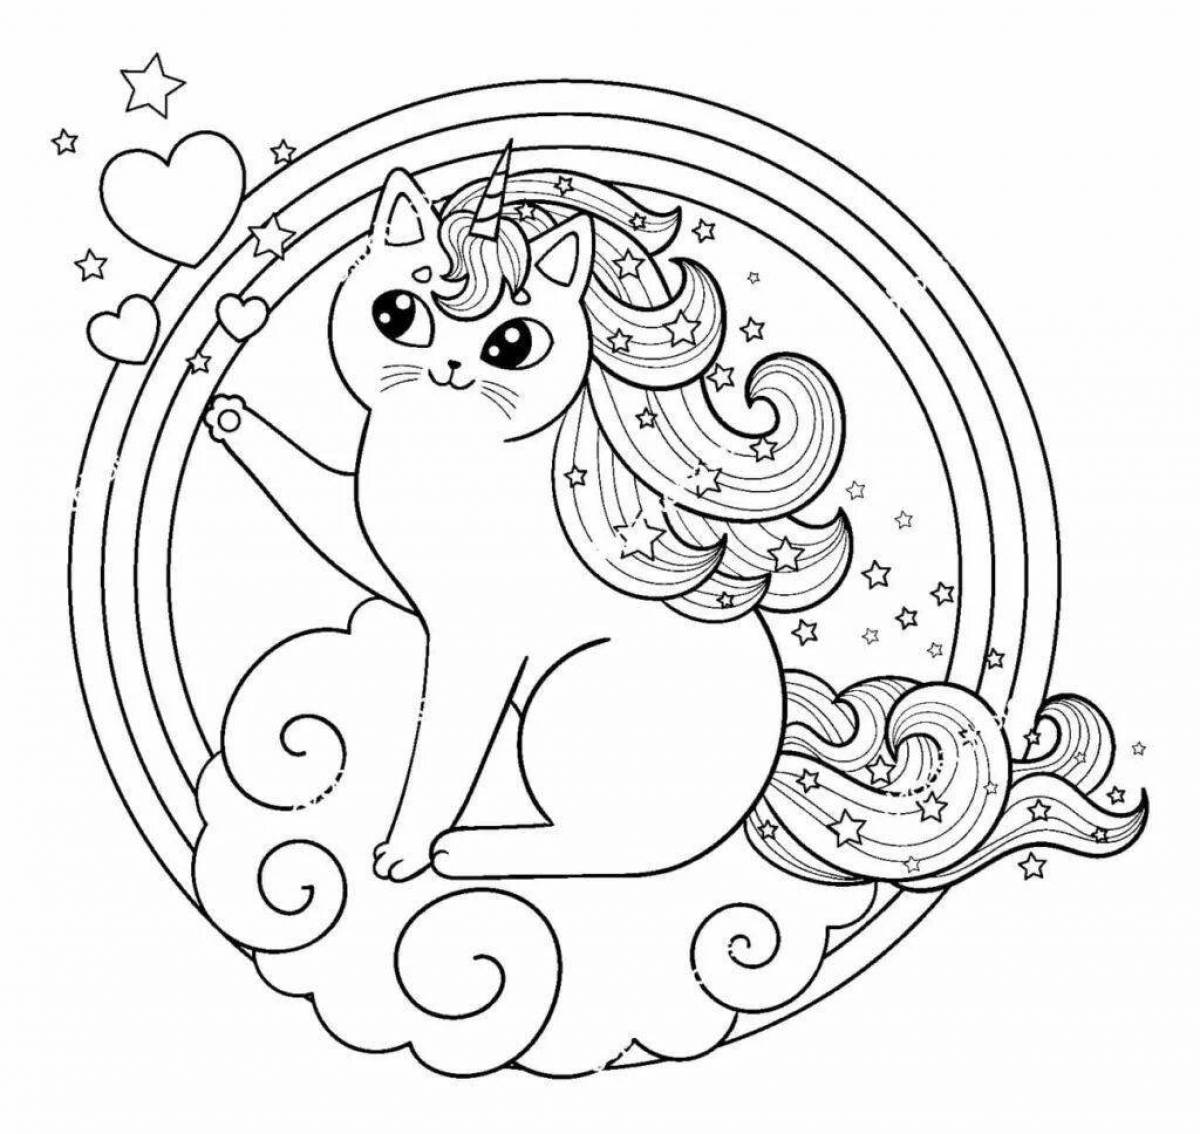 Glowing rainbow kitten coloring page